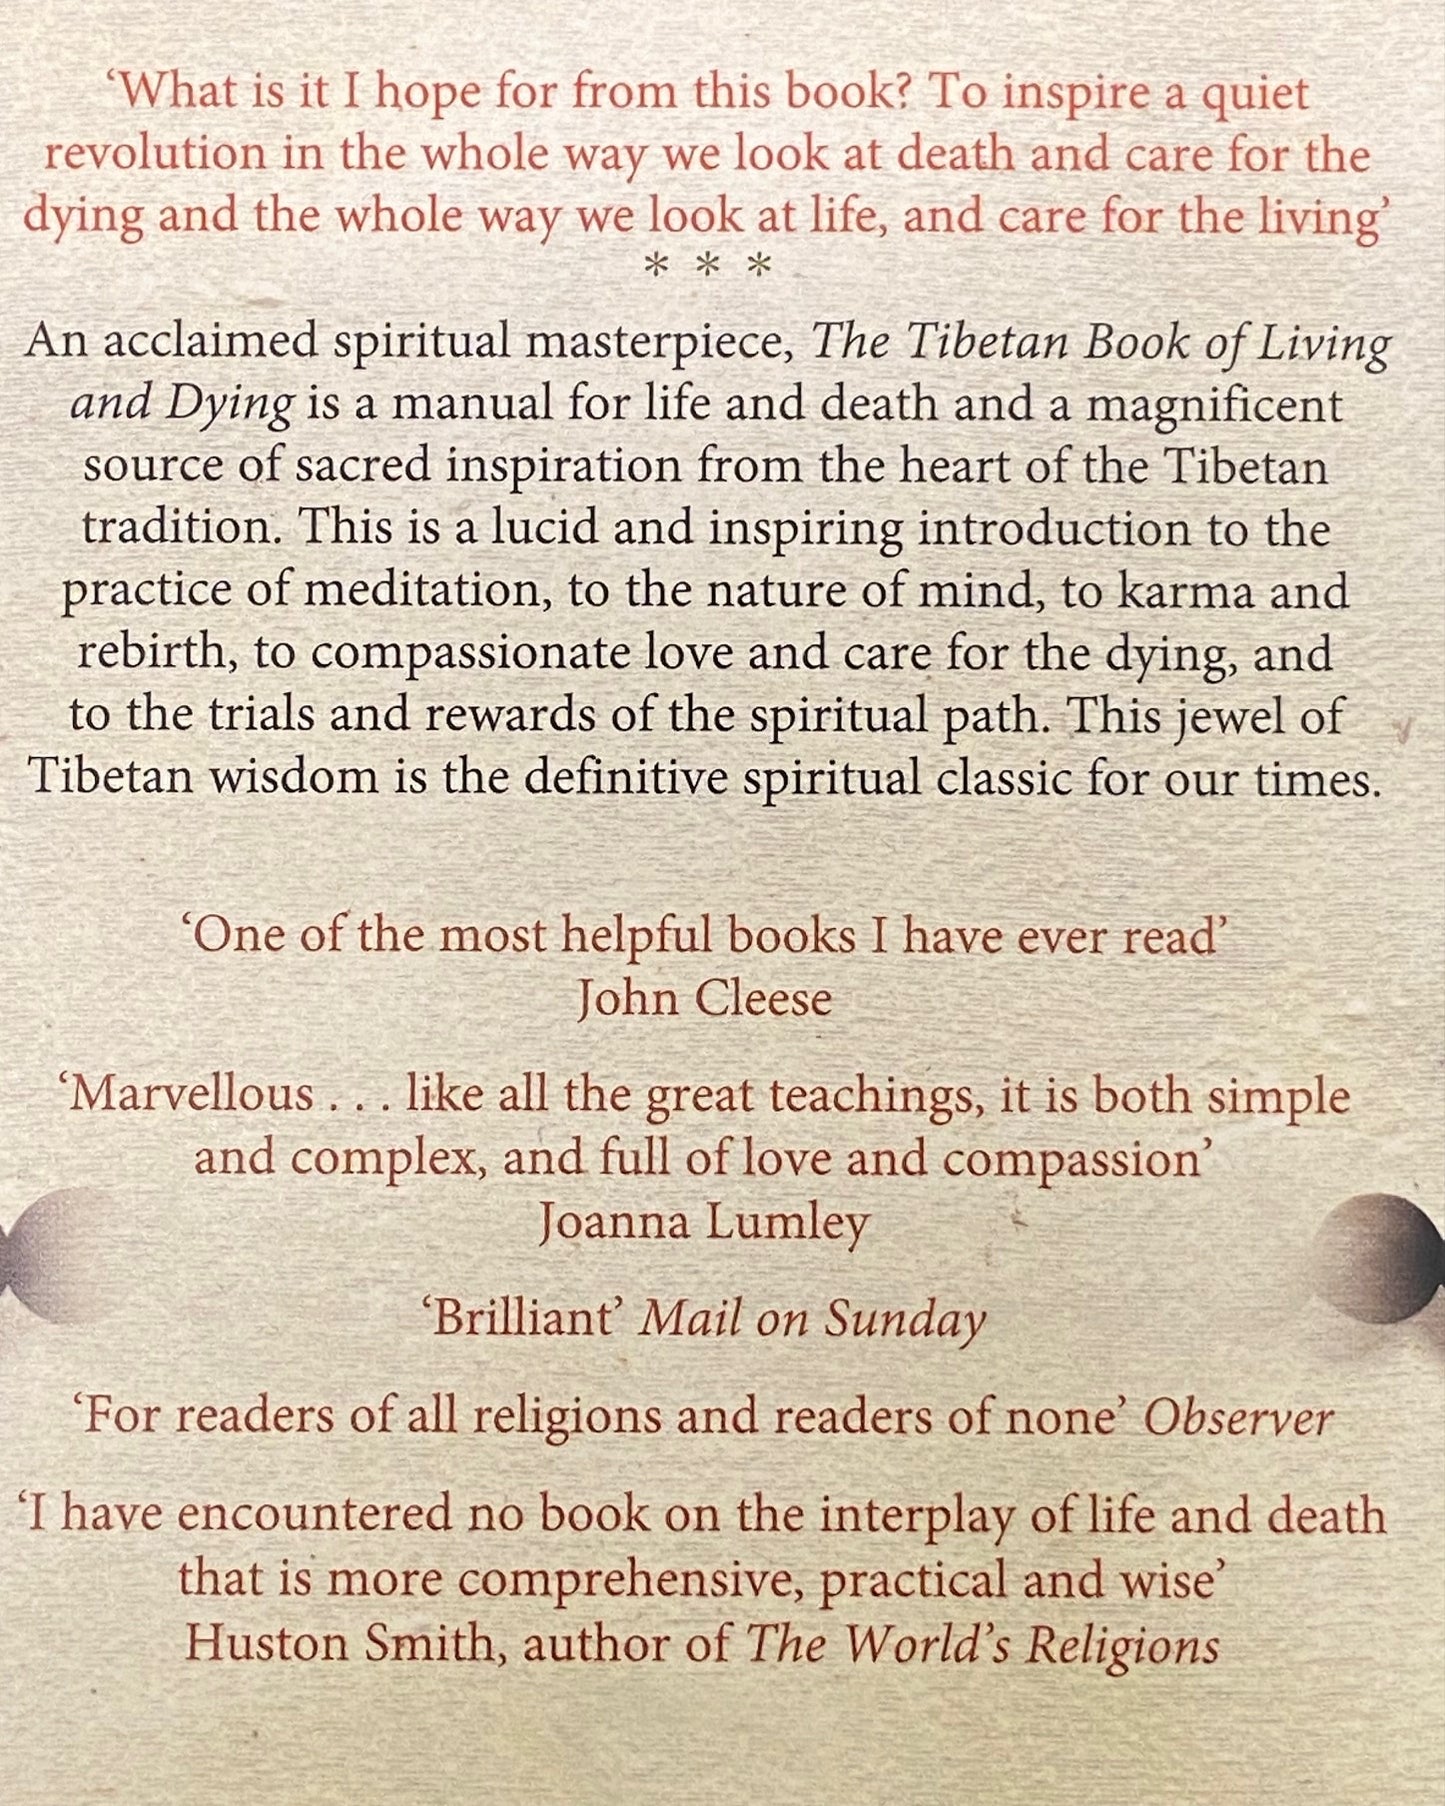 The Tibetan Book of Living and Dying Edited by Patrick Gaffney & Andrew Harvey